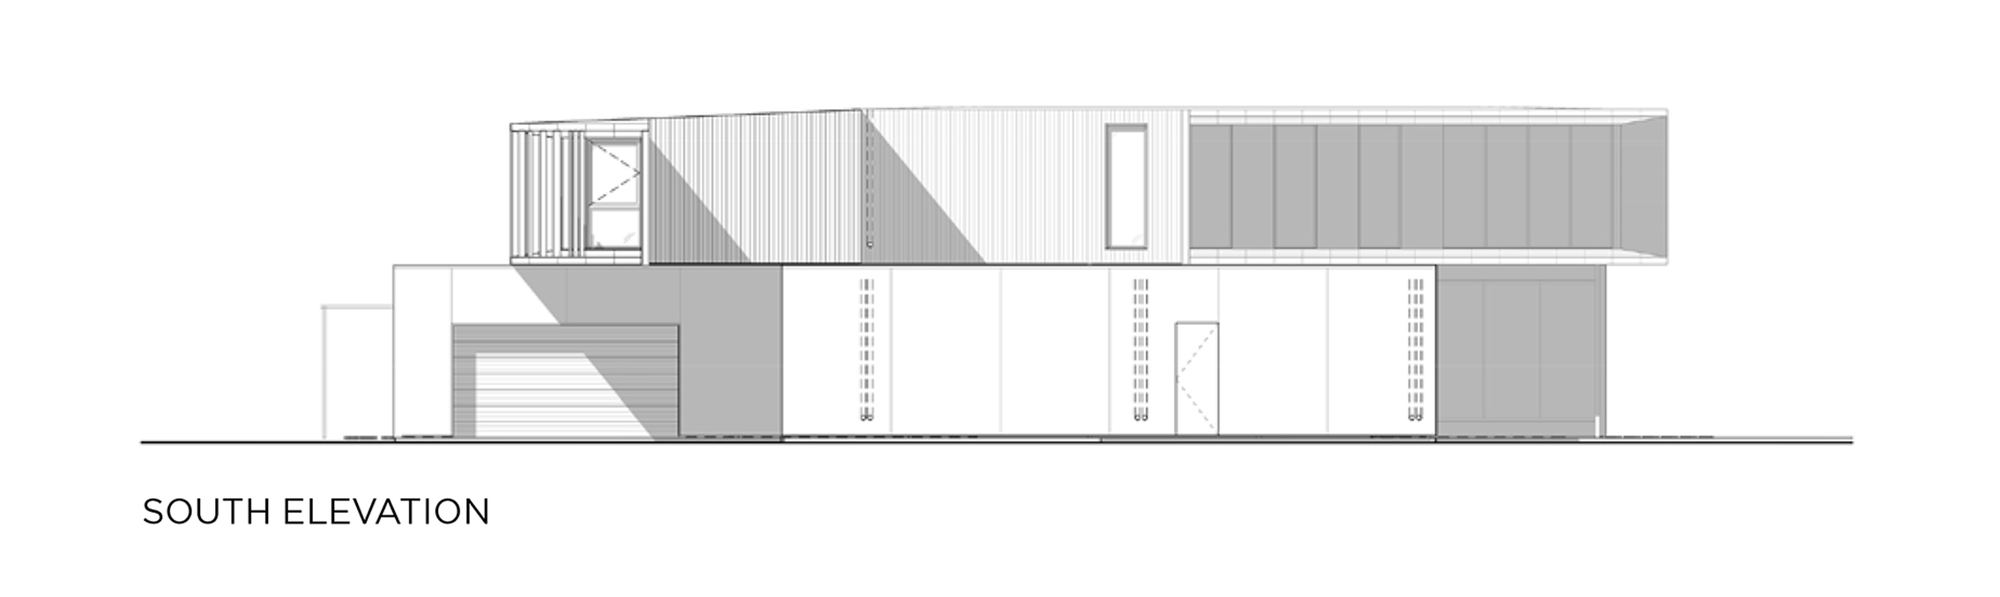 baulinder-haus-hufft-projects_south_elevation